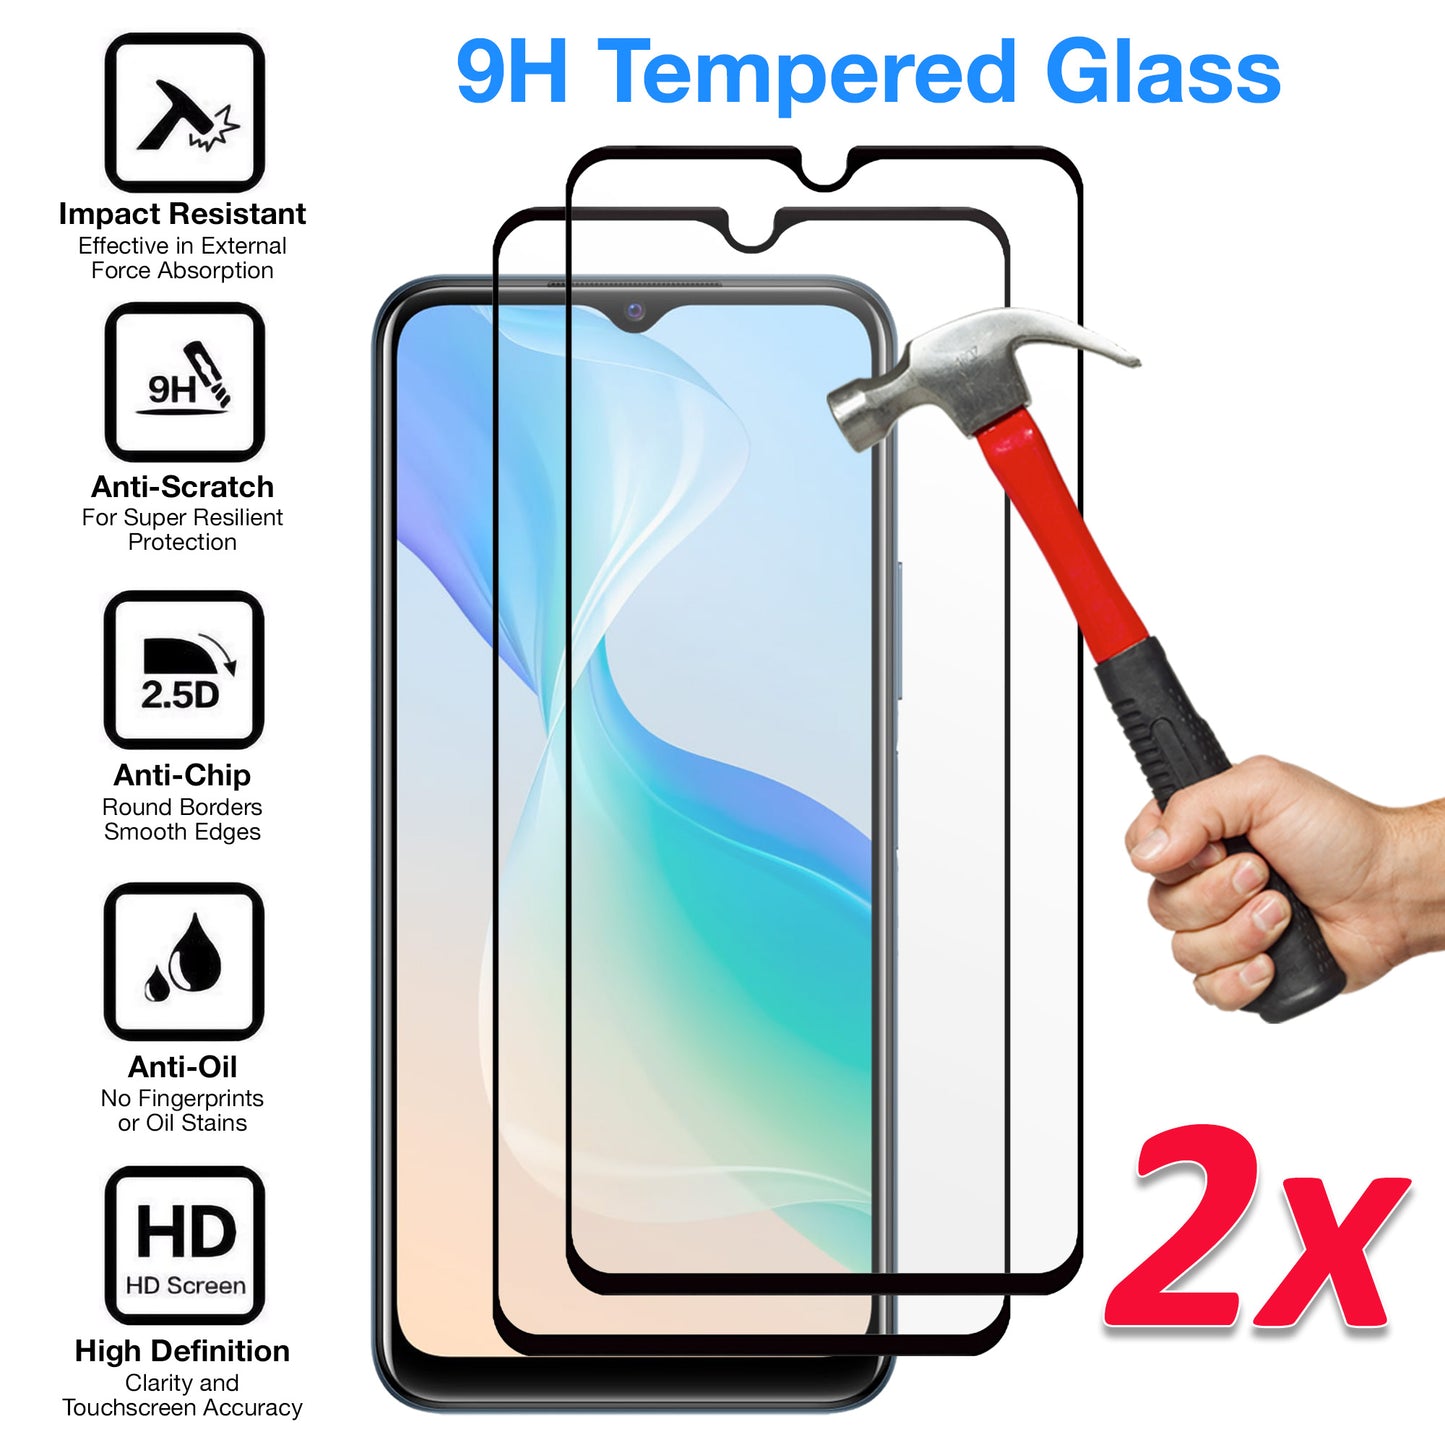 [2 Pack] MEZON Full Coverage Realme C21 Tempered Glass Crystal Clear Premium 9H HD Screen Protector (Realme C21, 9H Full)